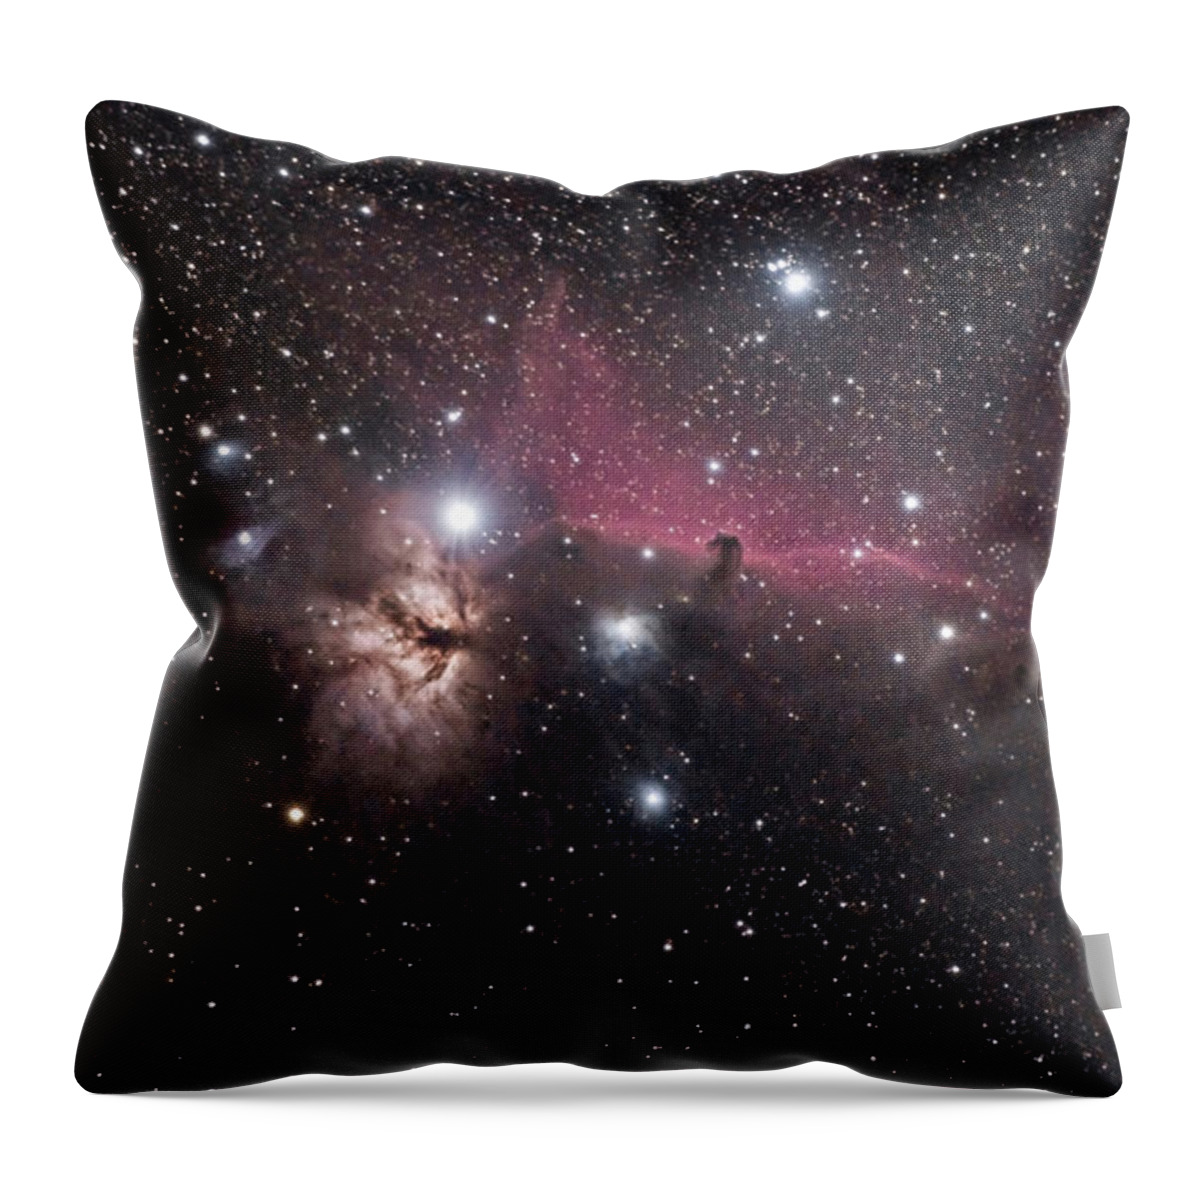 Astrophotography Throw Pillow featuring the photograph Horsehead Nebula by Grant Twiss